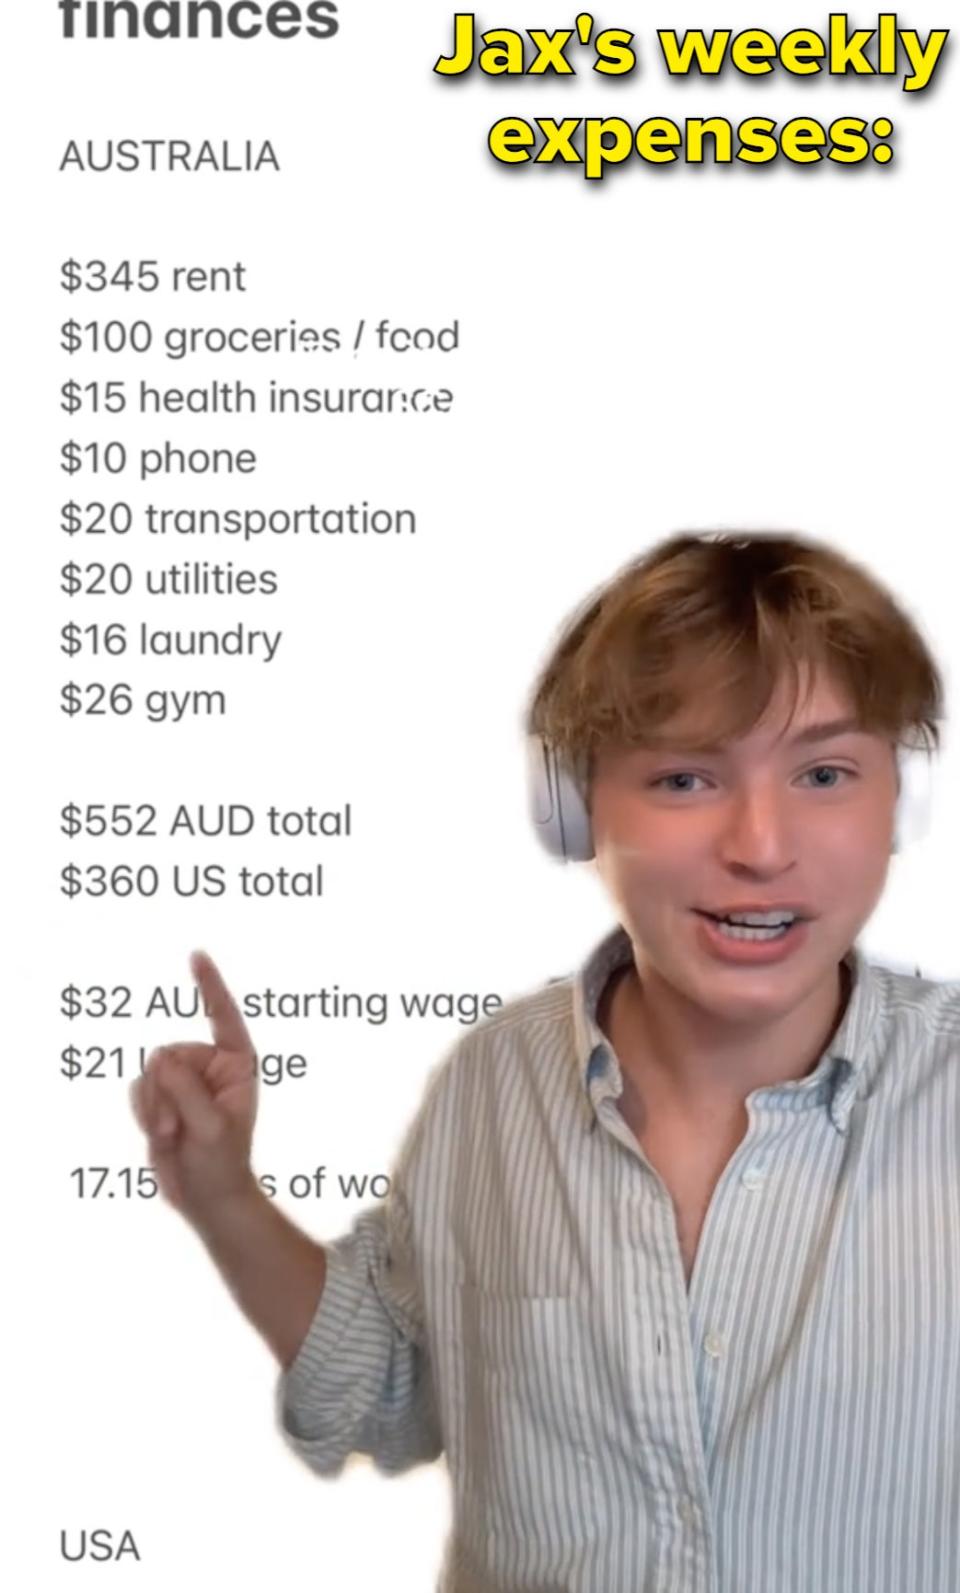 Person gesturing towards a screen showing a cost of living comparison between Australia and the USA